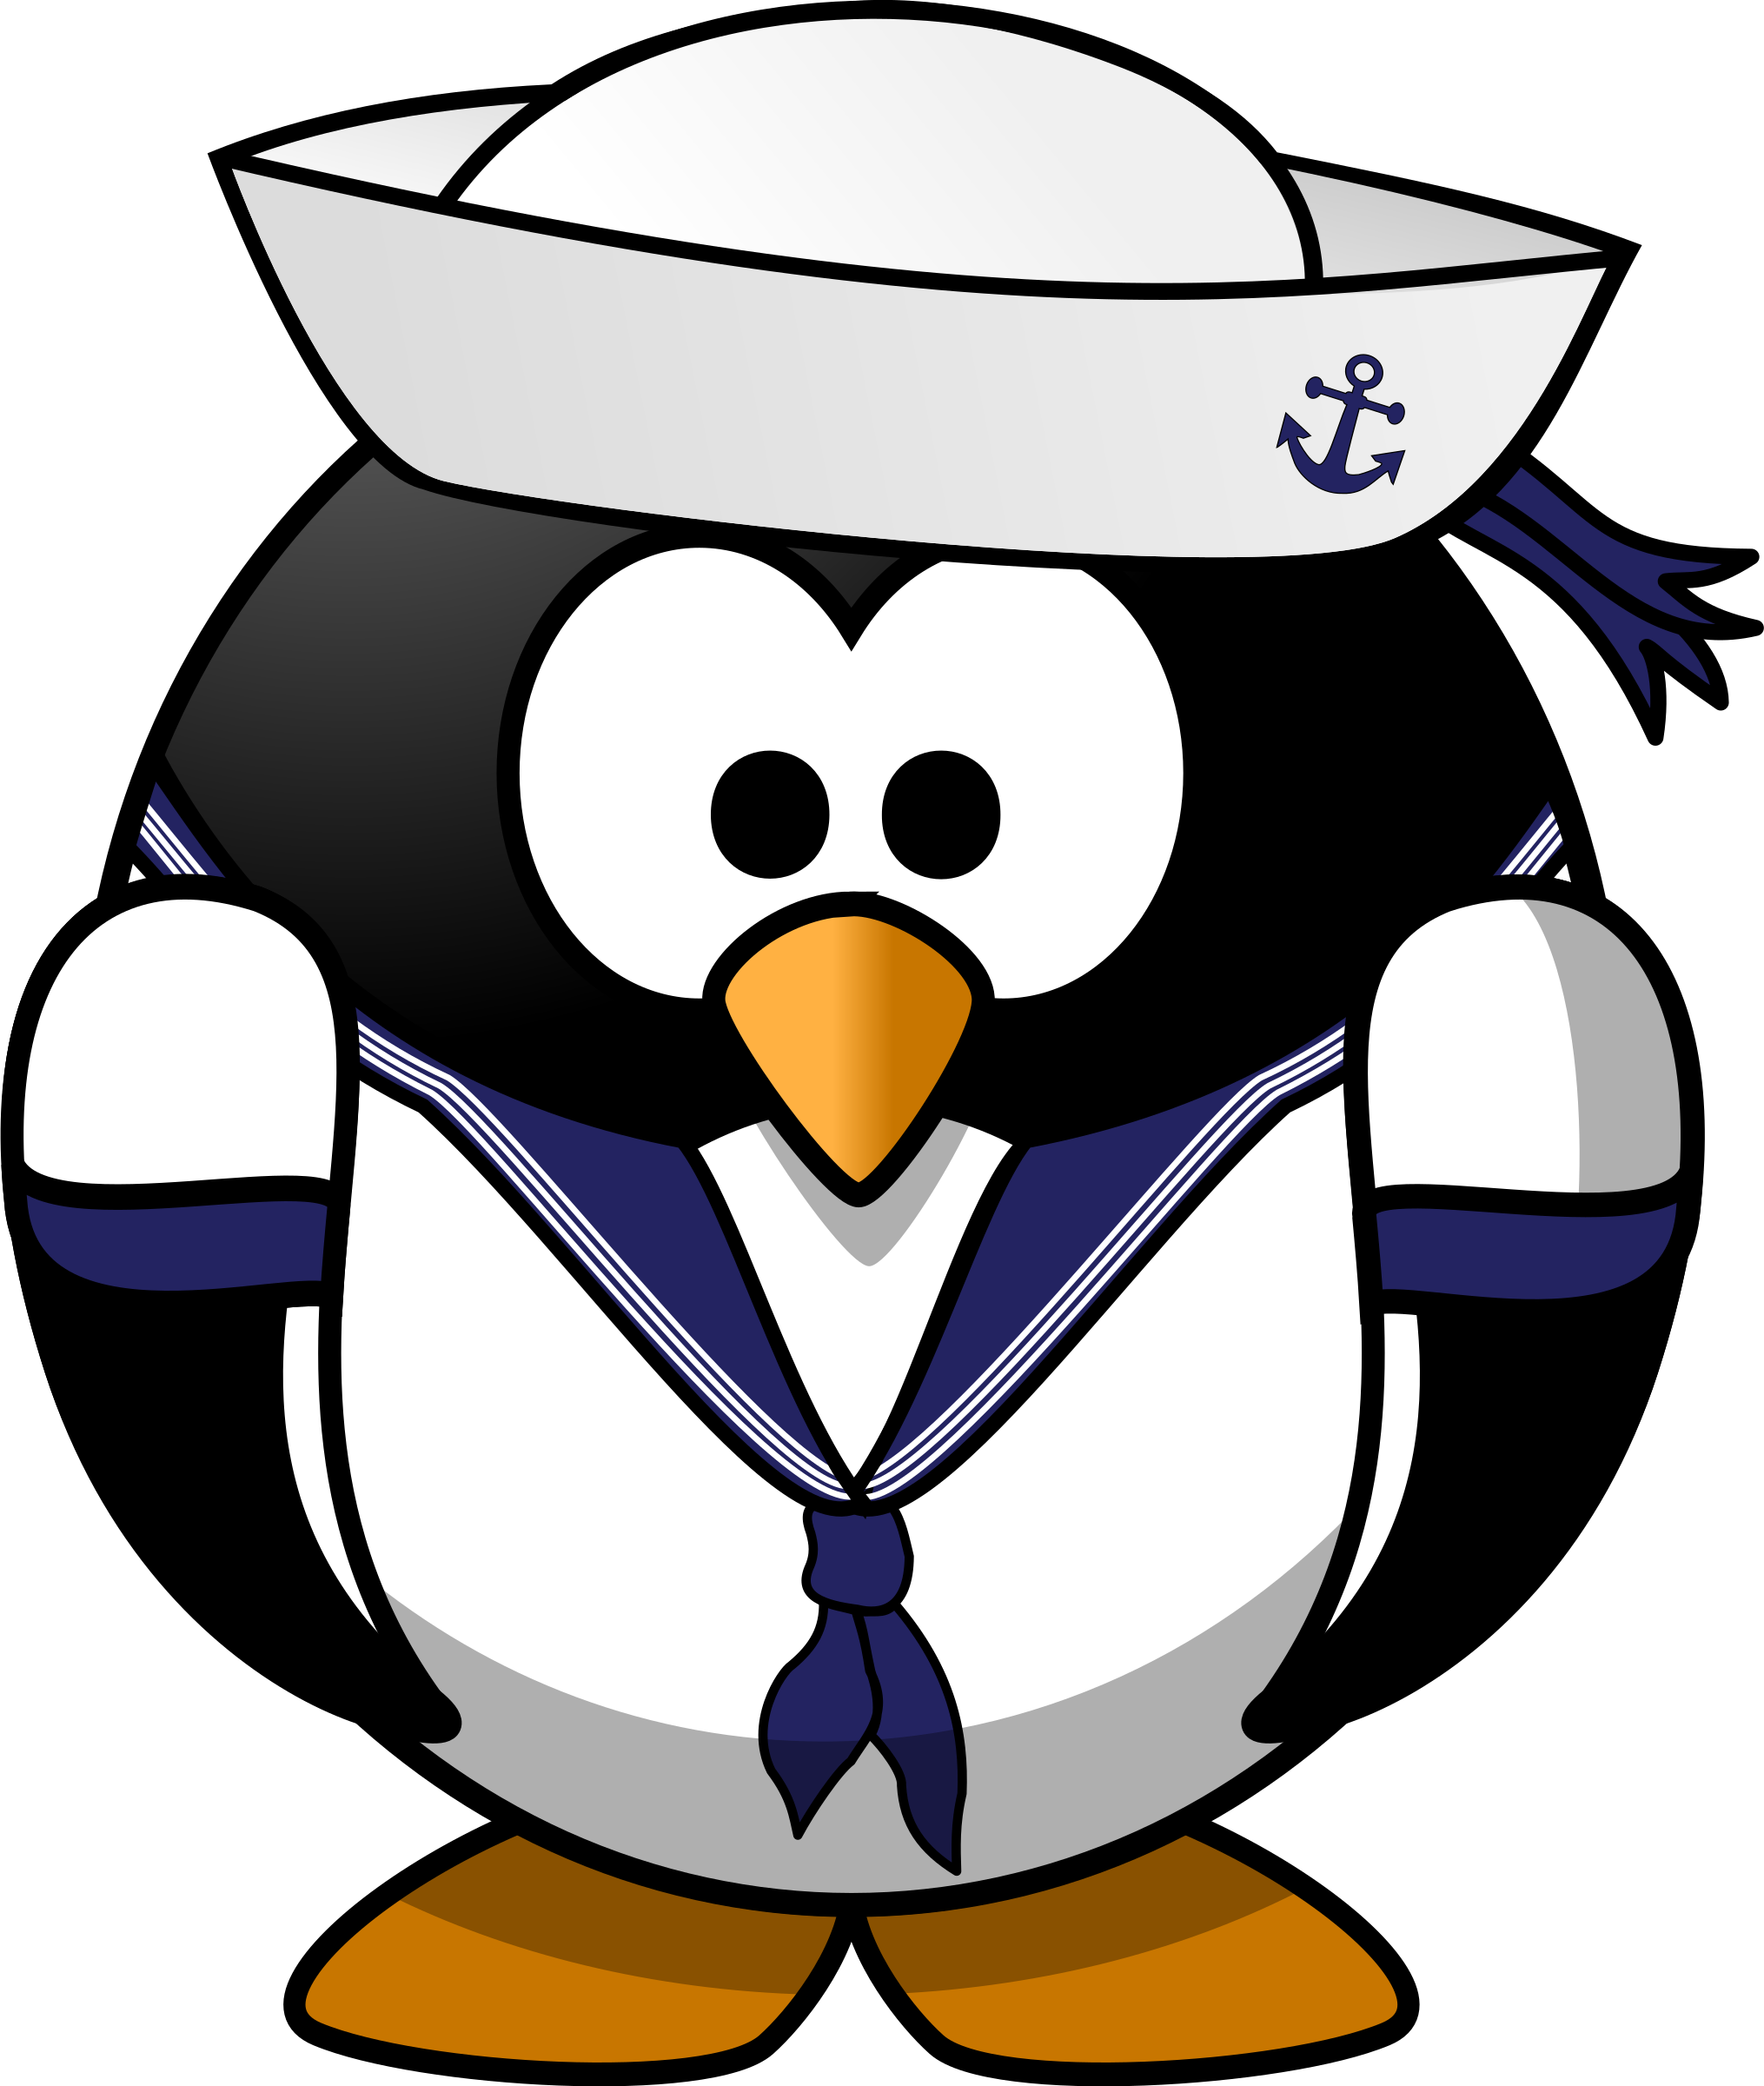 Popeye The Sailor Clipart #1. BIG IMAGE (PNG)